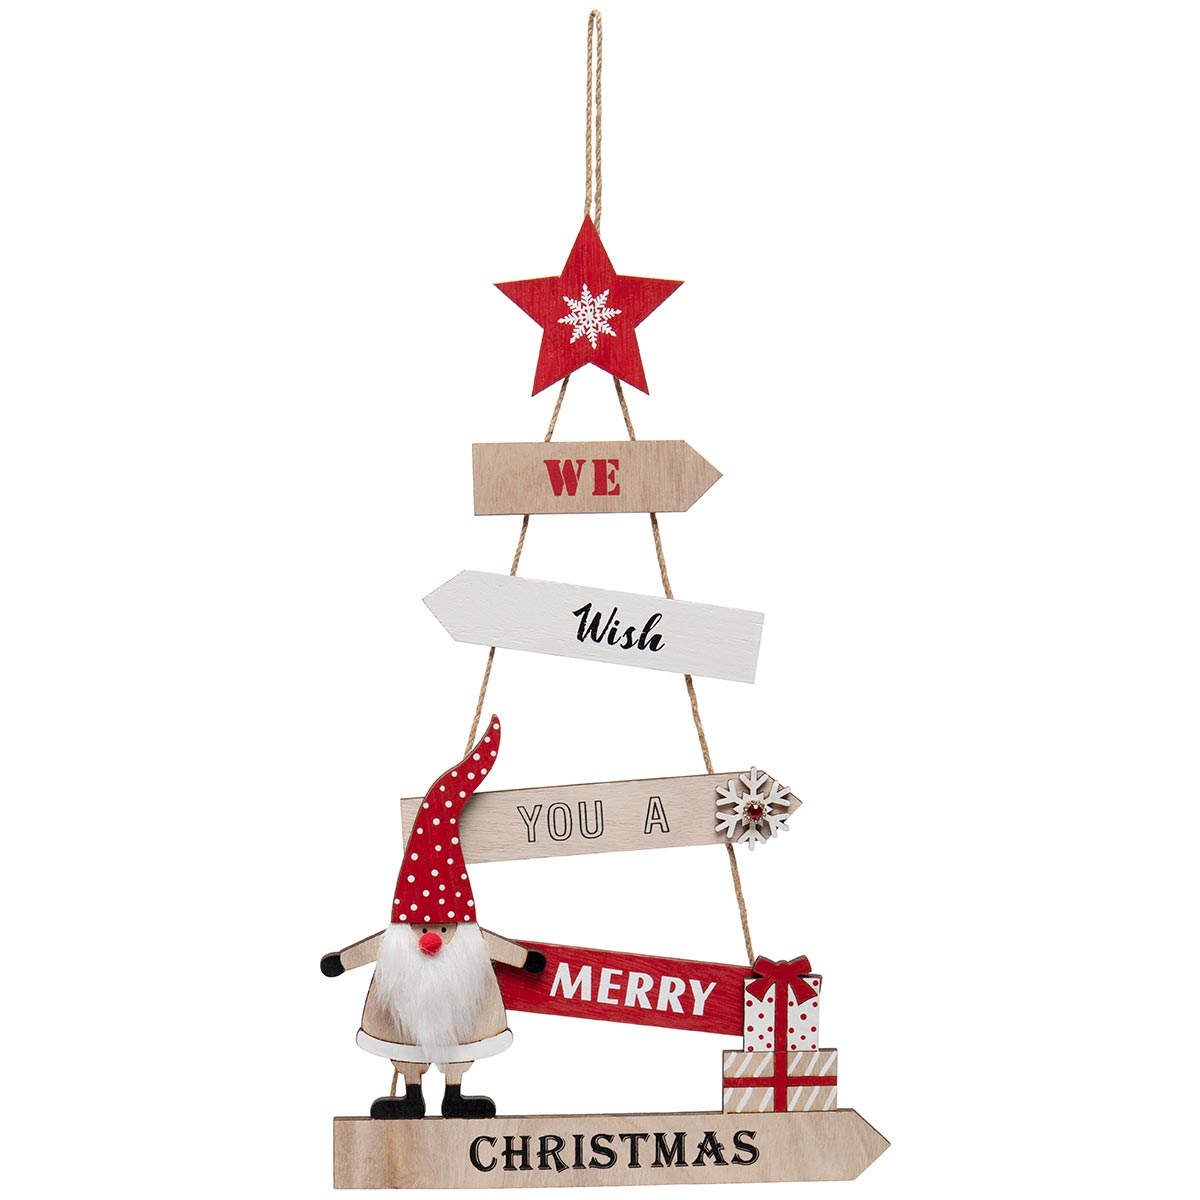 !WE WISH YOU A MERRY CHRISTMAS GNOME WOOD HANGING SIGN